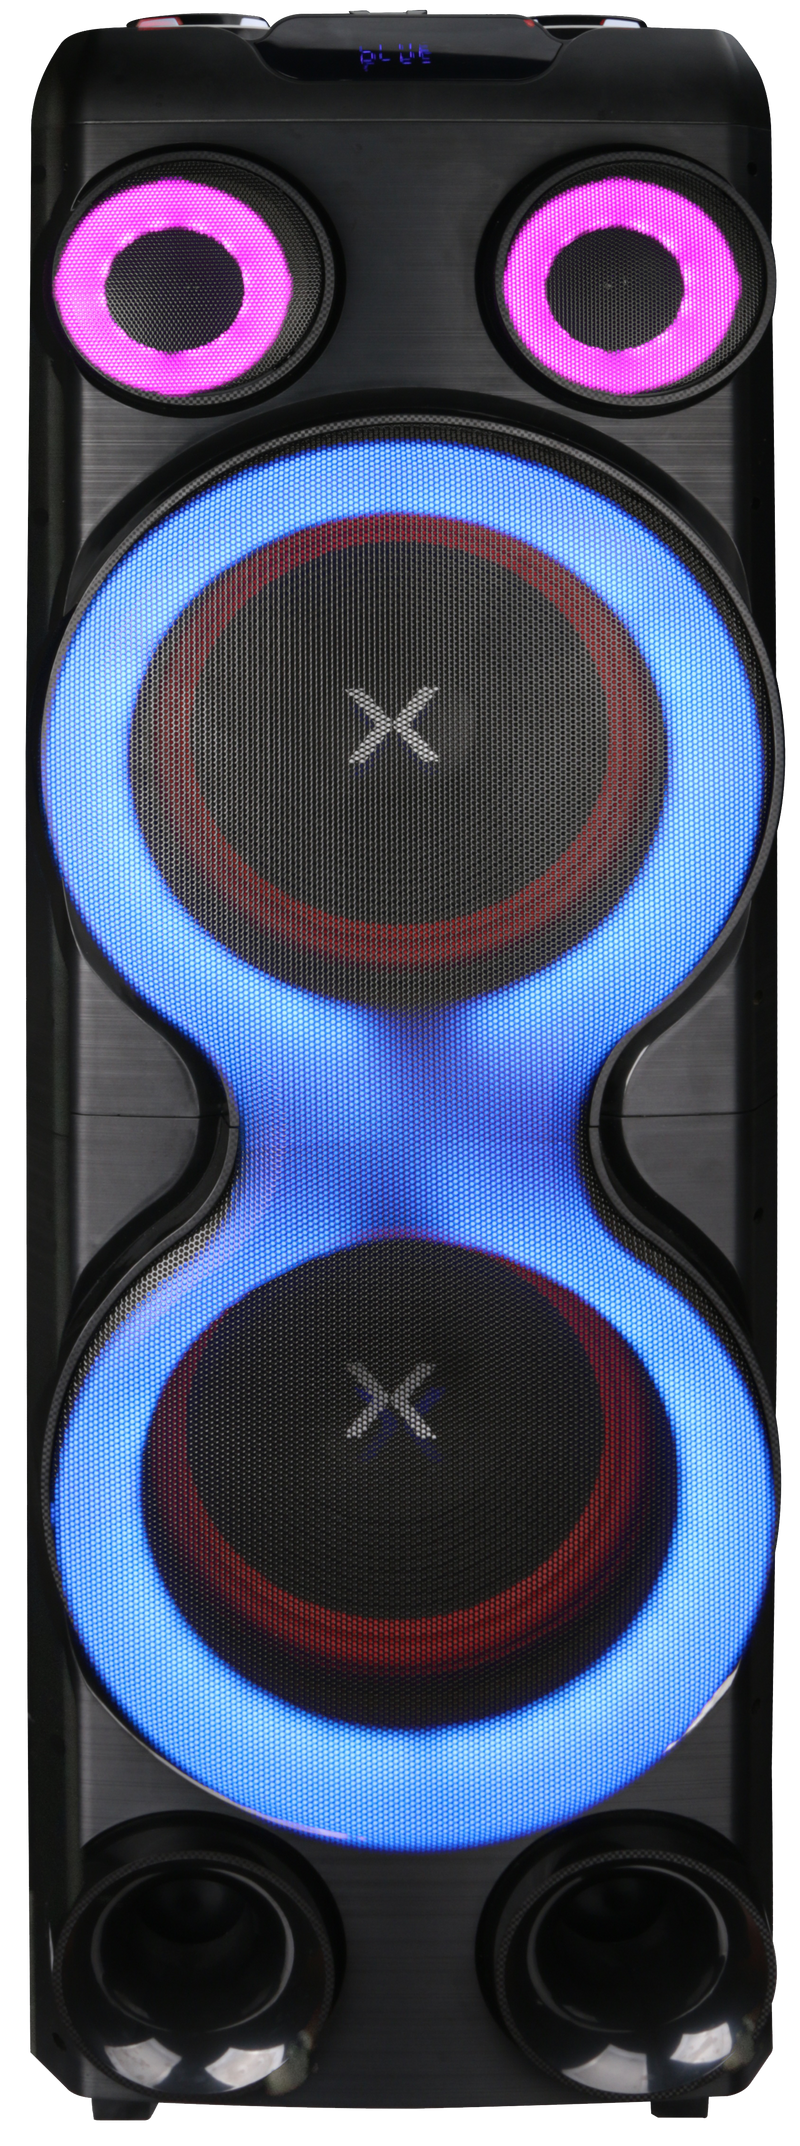 MPD25XB - EXTREME 12- MaxPower 12" X 2 Karaoke Bluetooth speaker with different LED light modes & heavy bass